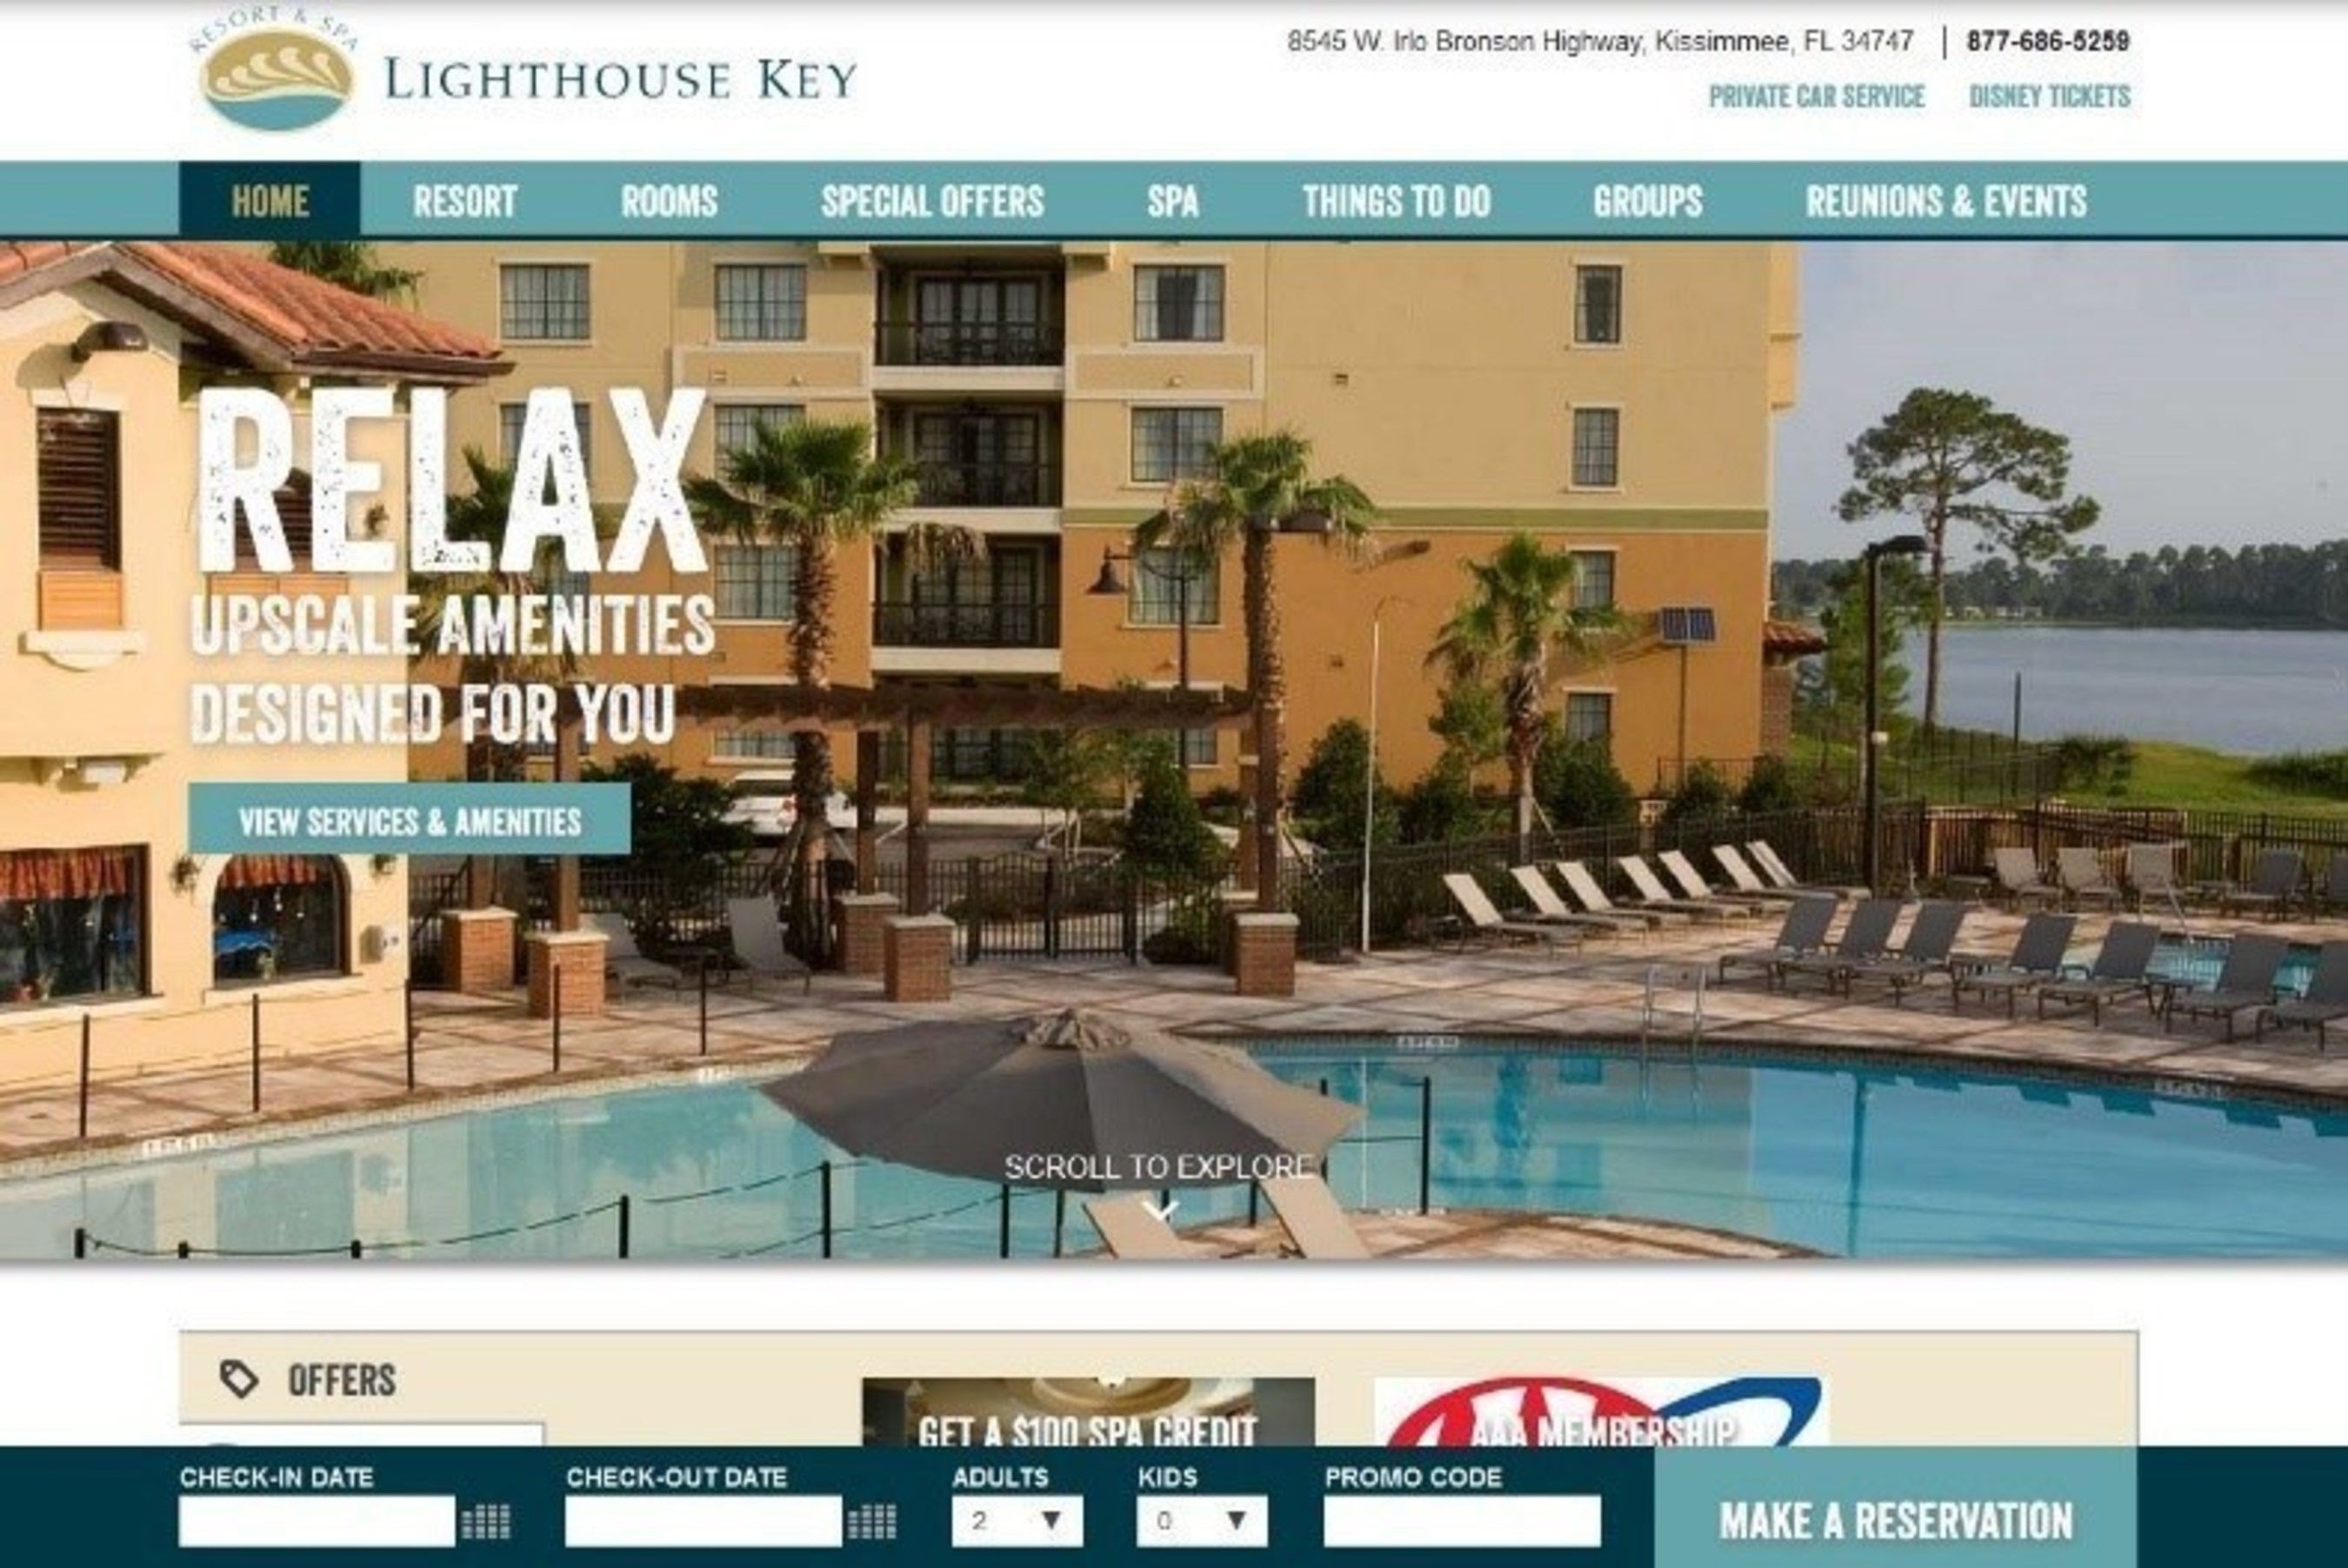 Booking a Florida vacation is easier than ever with Lighthouse Key Resort's new website. The Kissimmee resort near Walt Disney World just debuted the site, which features a sleek, responsive design and streamlined navigation. For information, visit www.LighthouseKeyResort.com or call 1-844-258-2501.